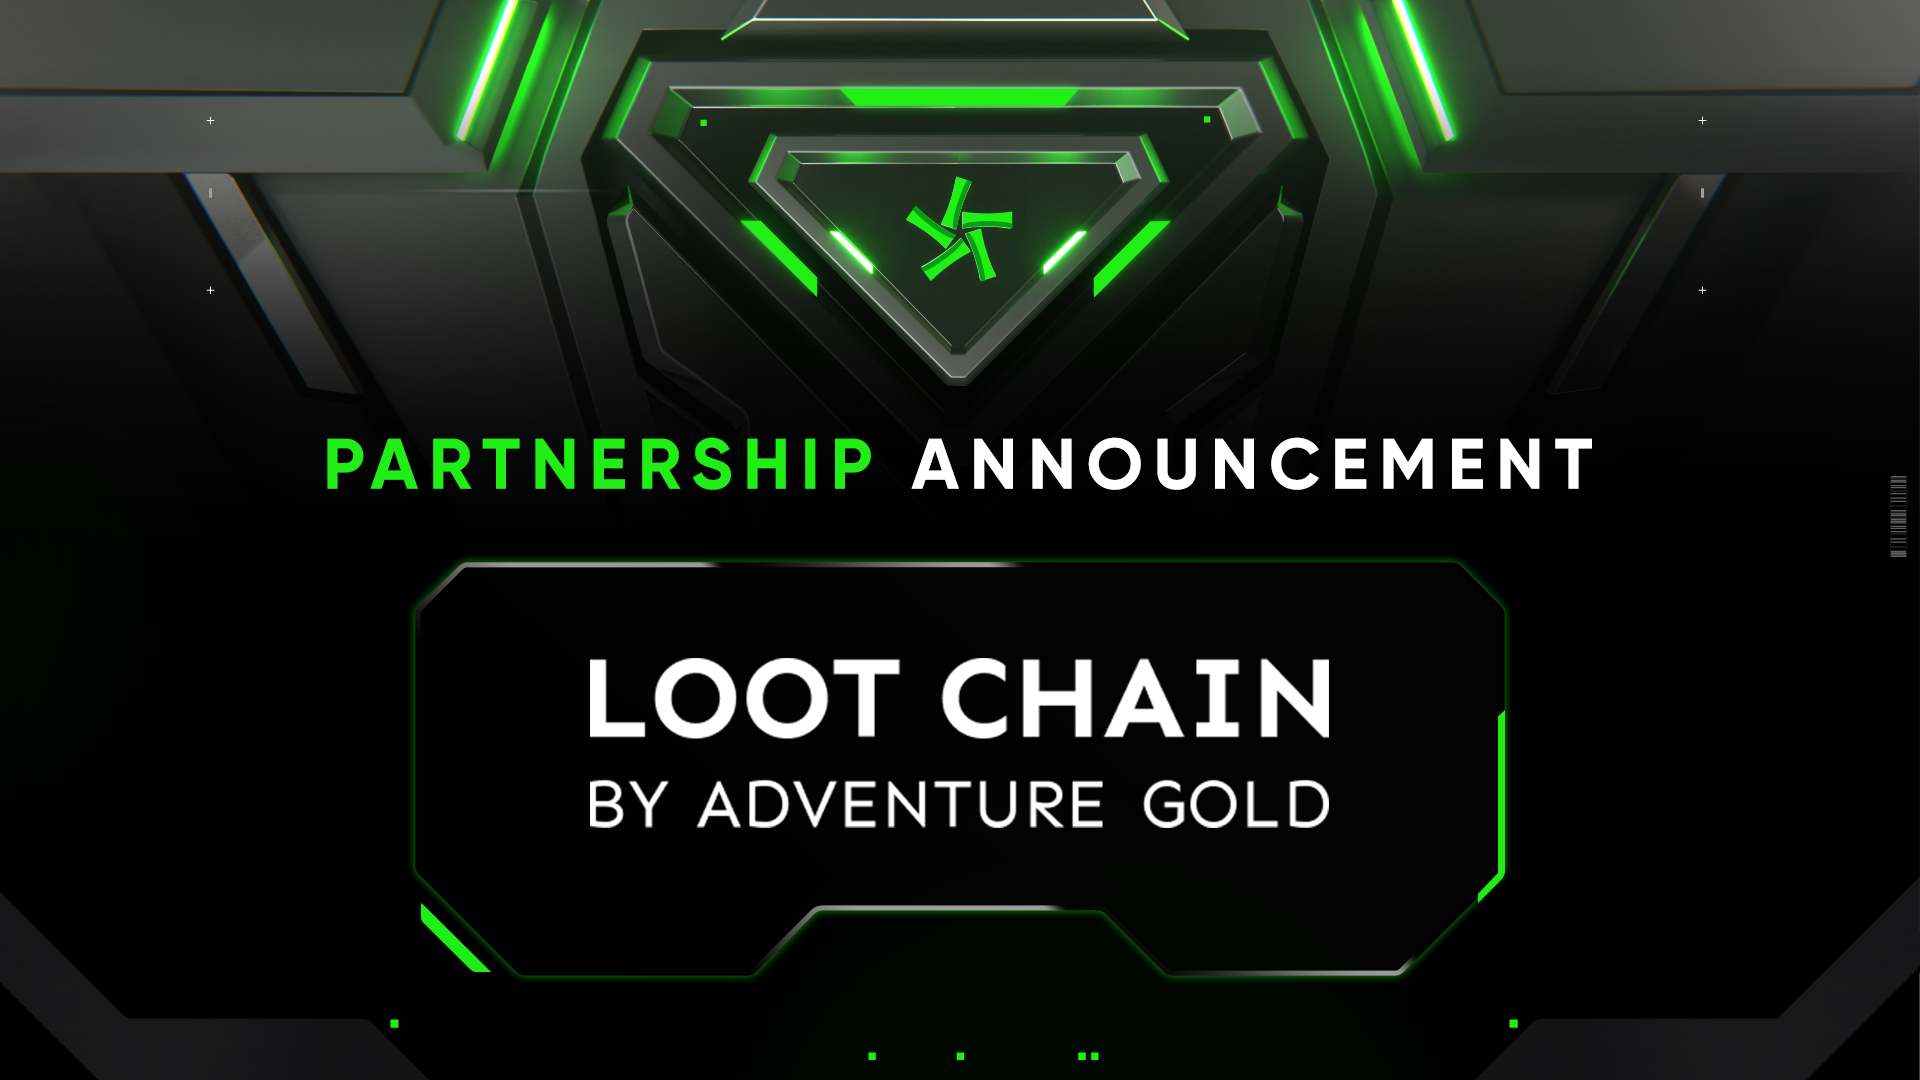 Ancient8 Partners With Loot Chain by Adventure Gold To Establish A Thriving Game Ecosystem